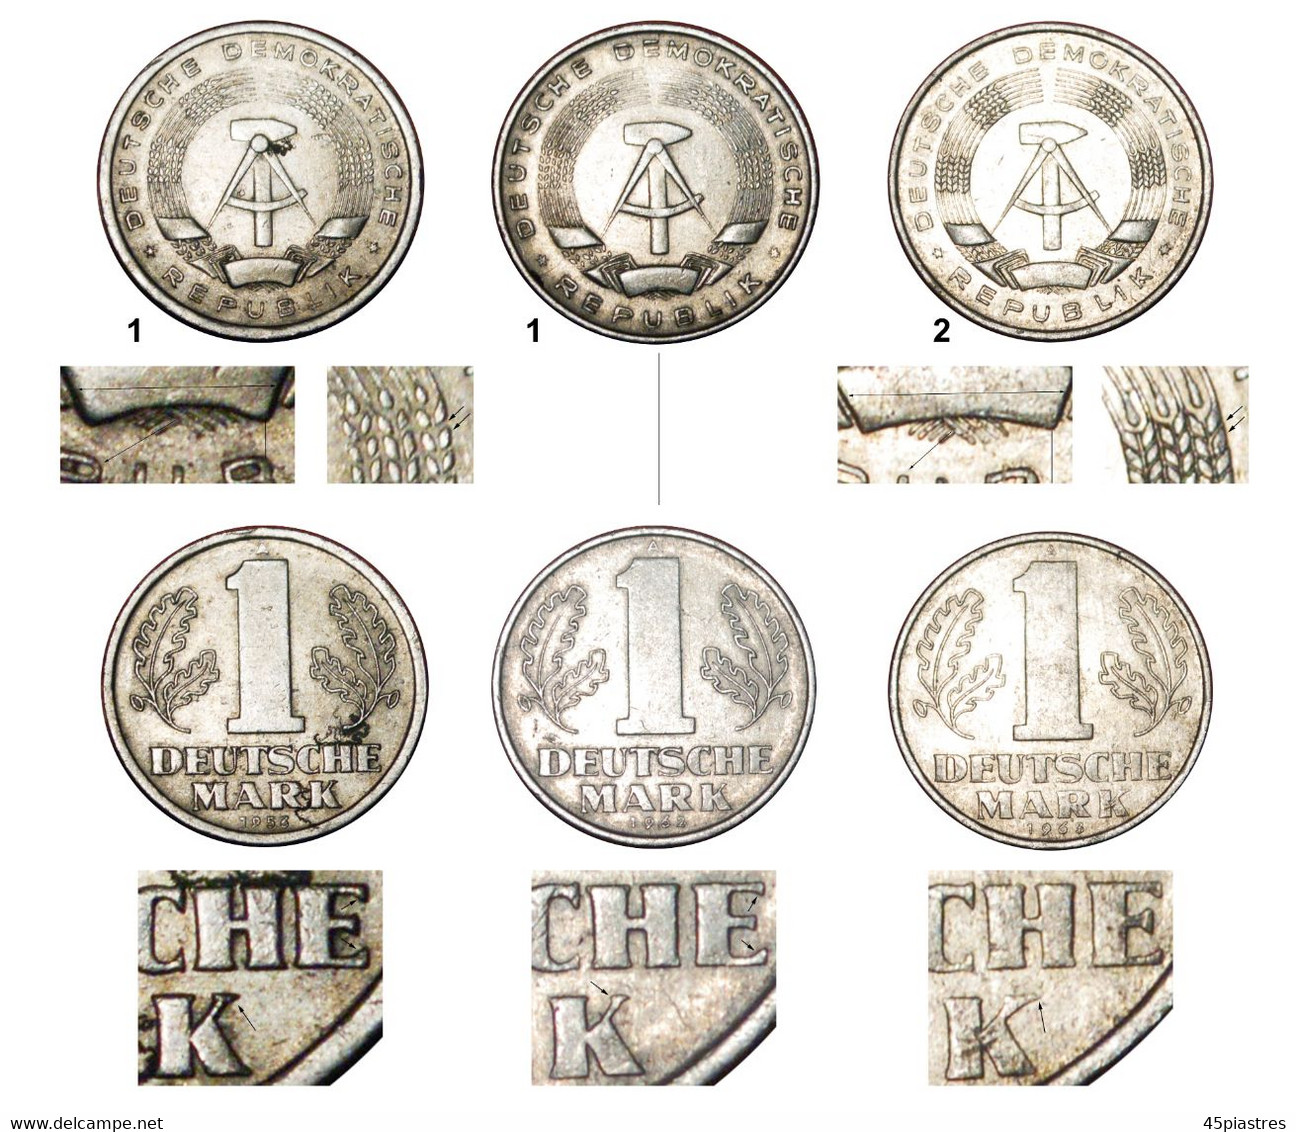 * DEUTSCHE MARK (1956-1963)★ GERMANY ★ 1 MARK 1963A! DISCOVERY COIN! LOW START ★ NO RESERVE! - 1 Mark